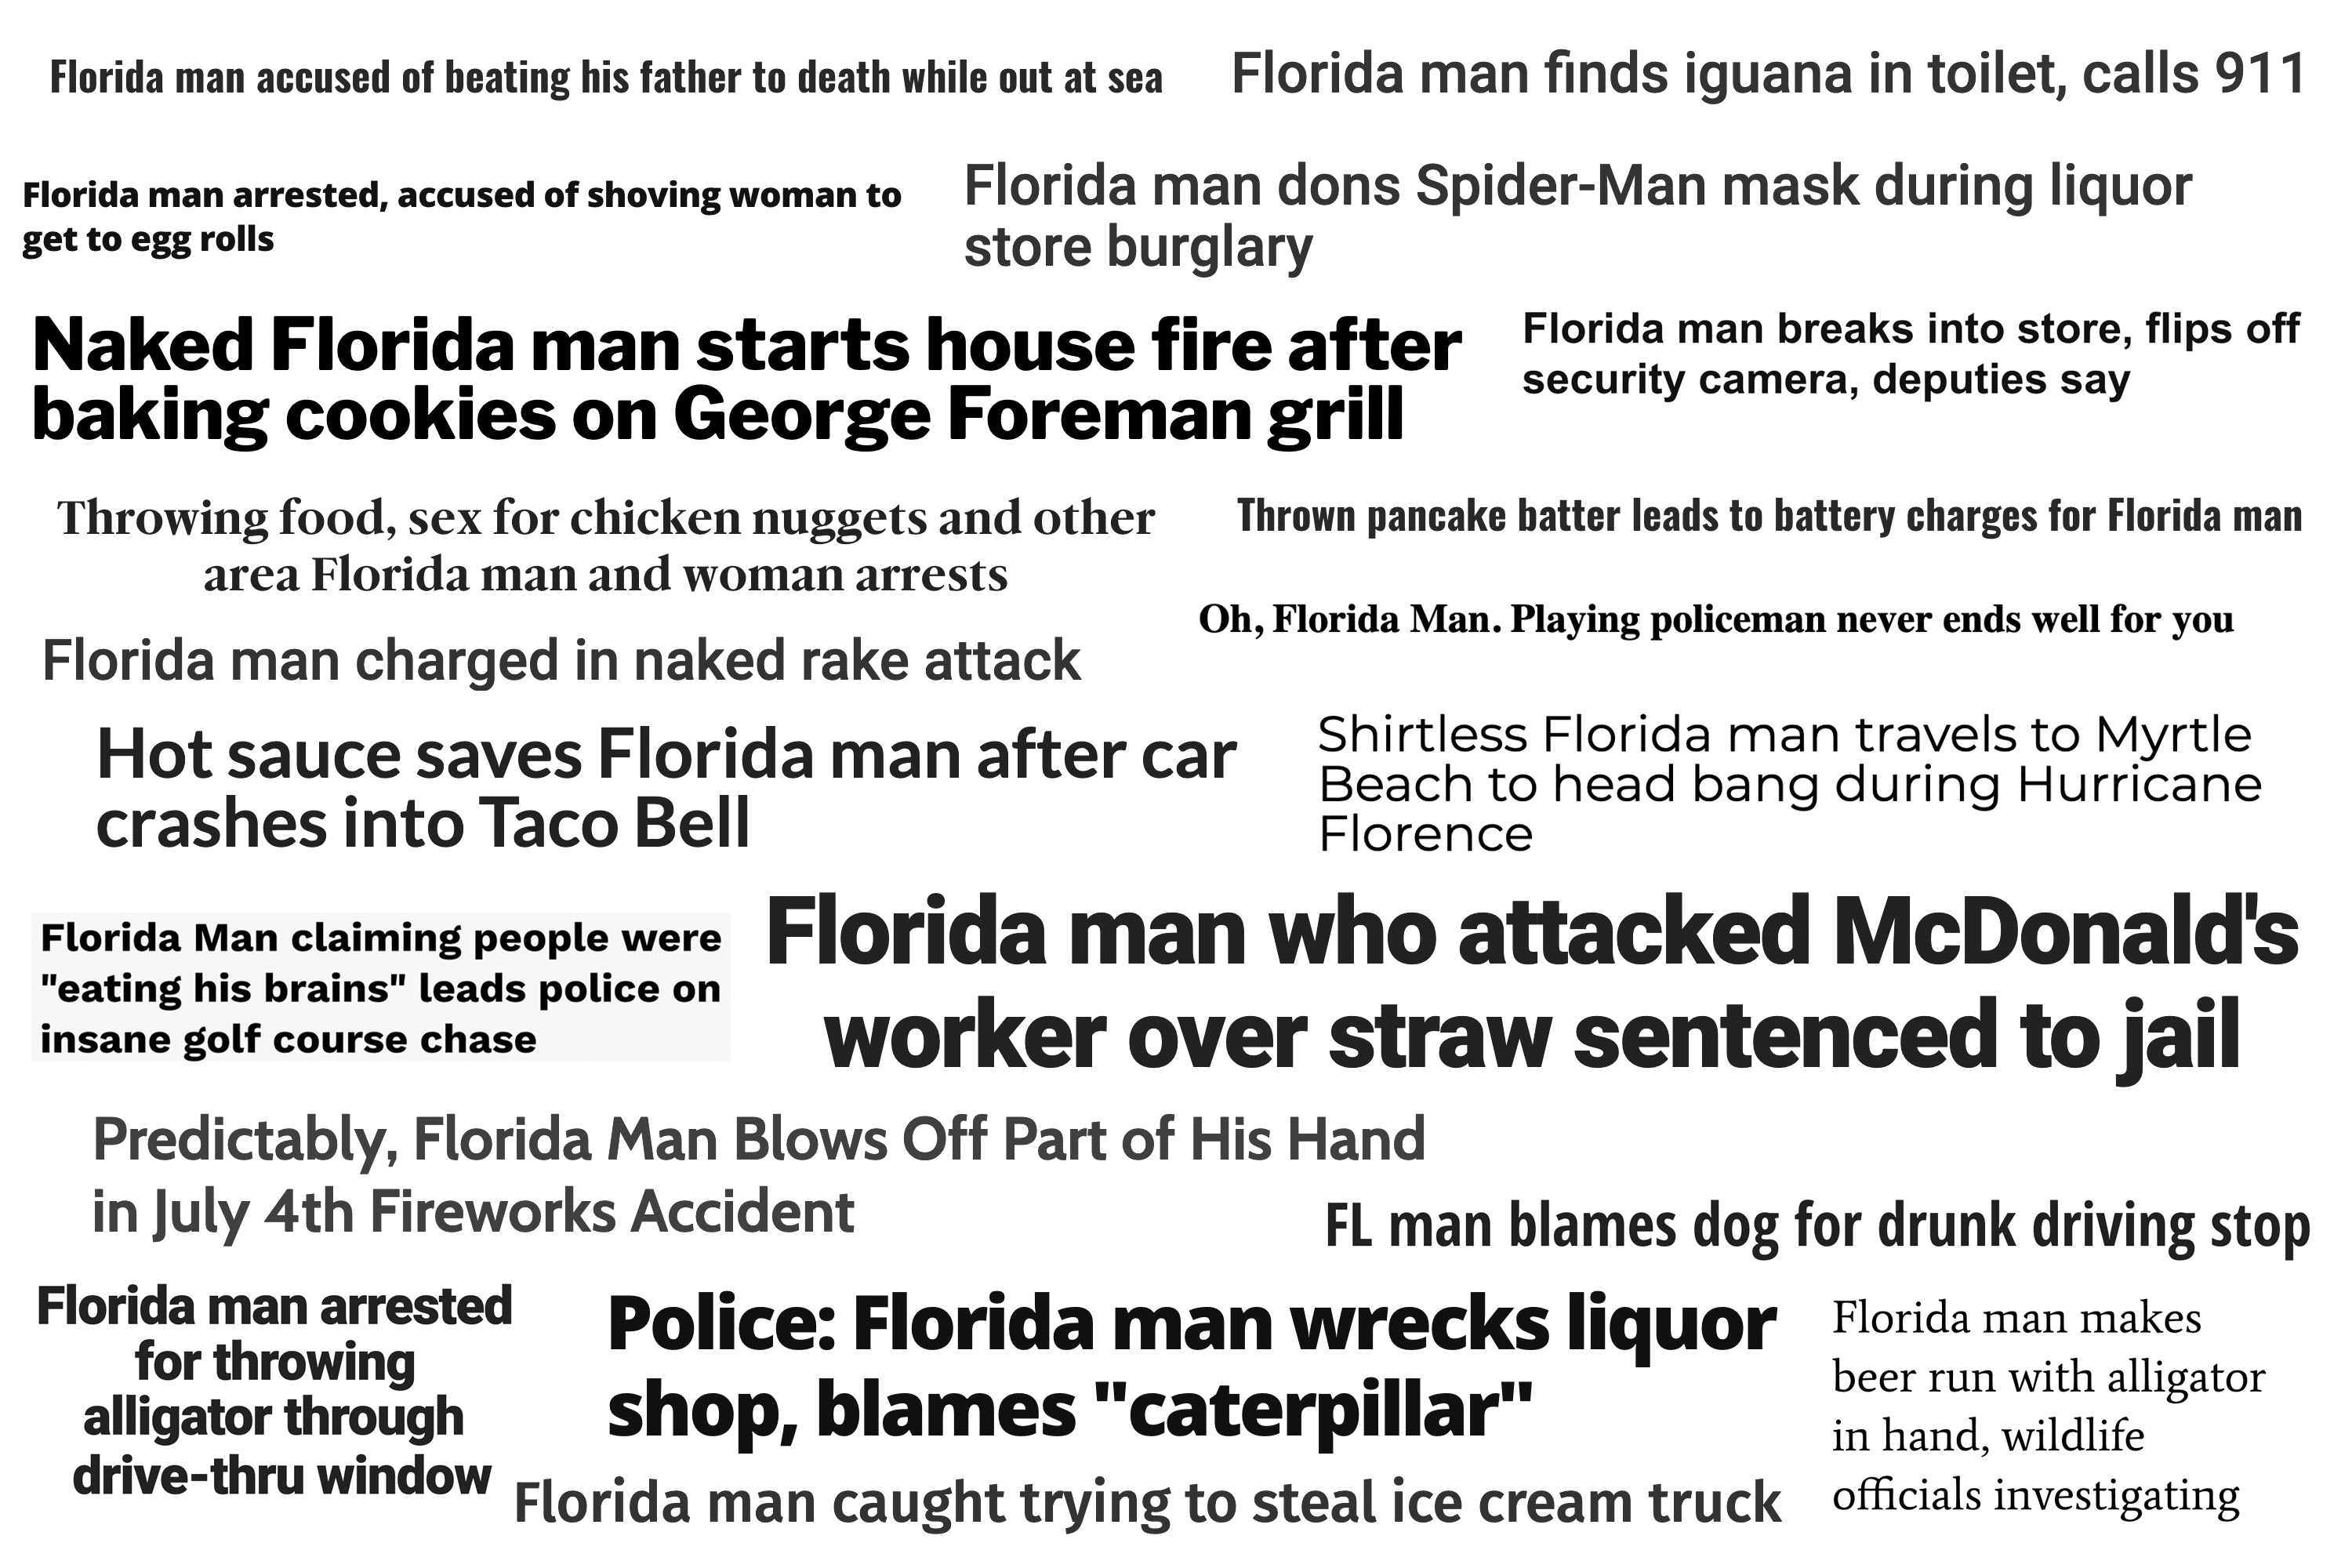 The 'Florida man' is not so funny sometimes - Poynter